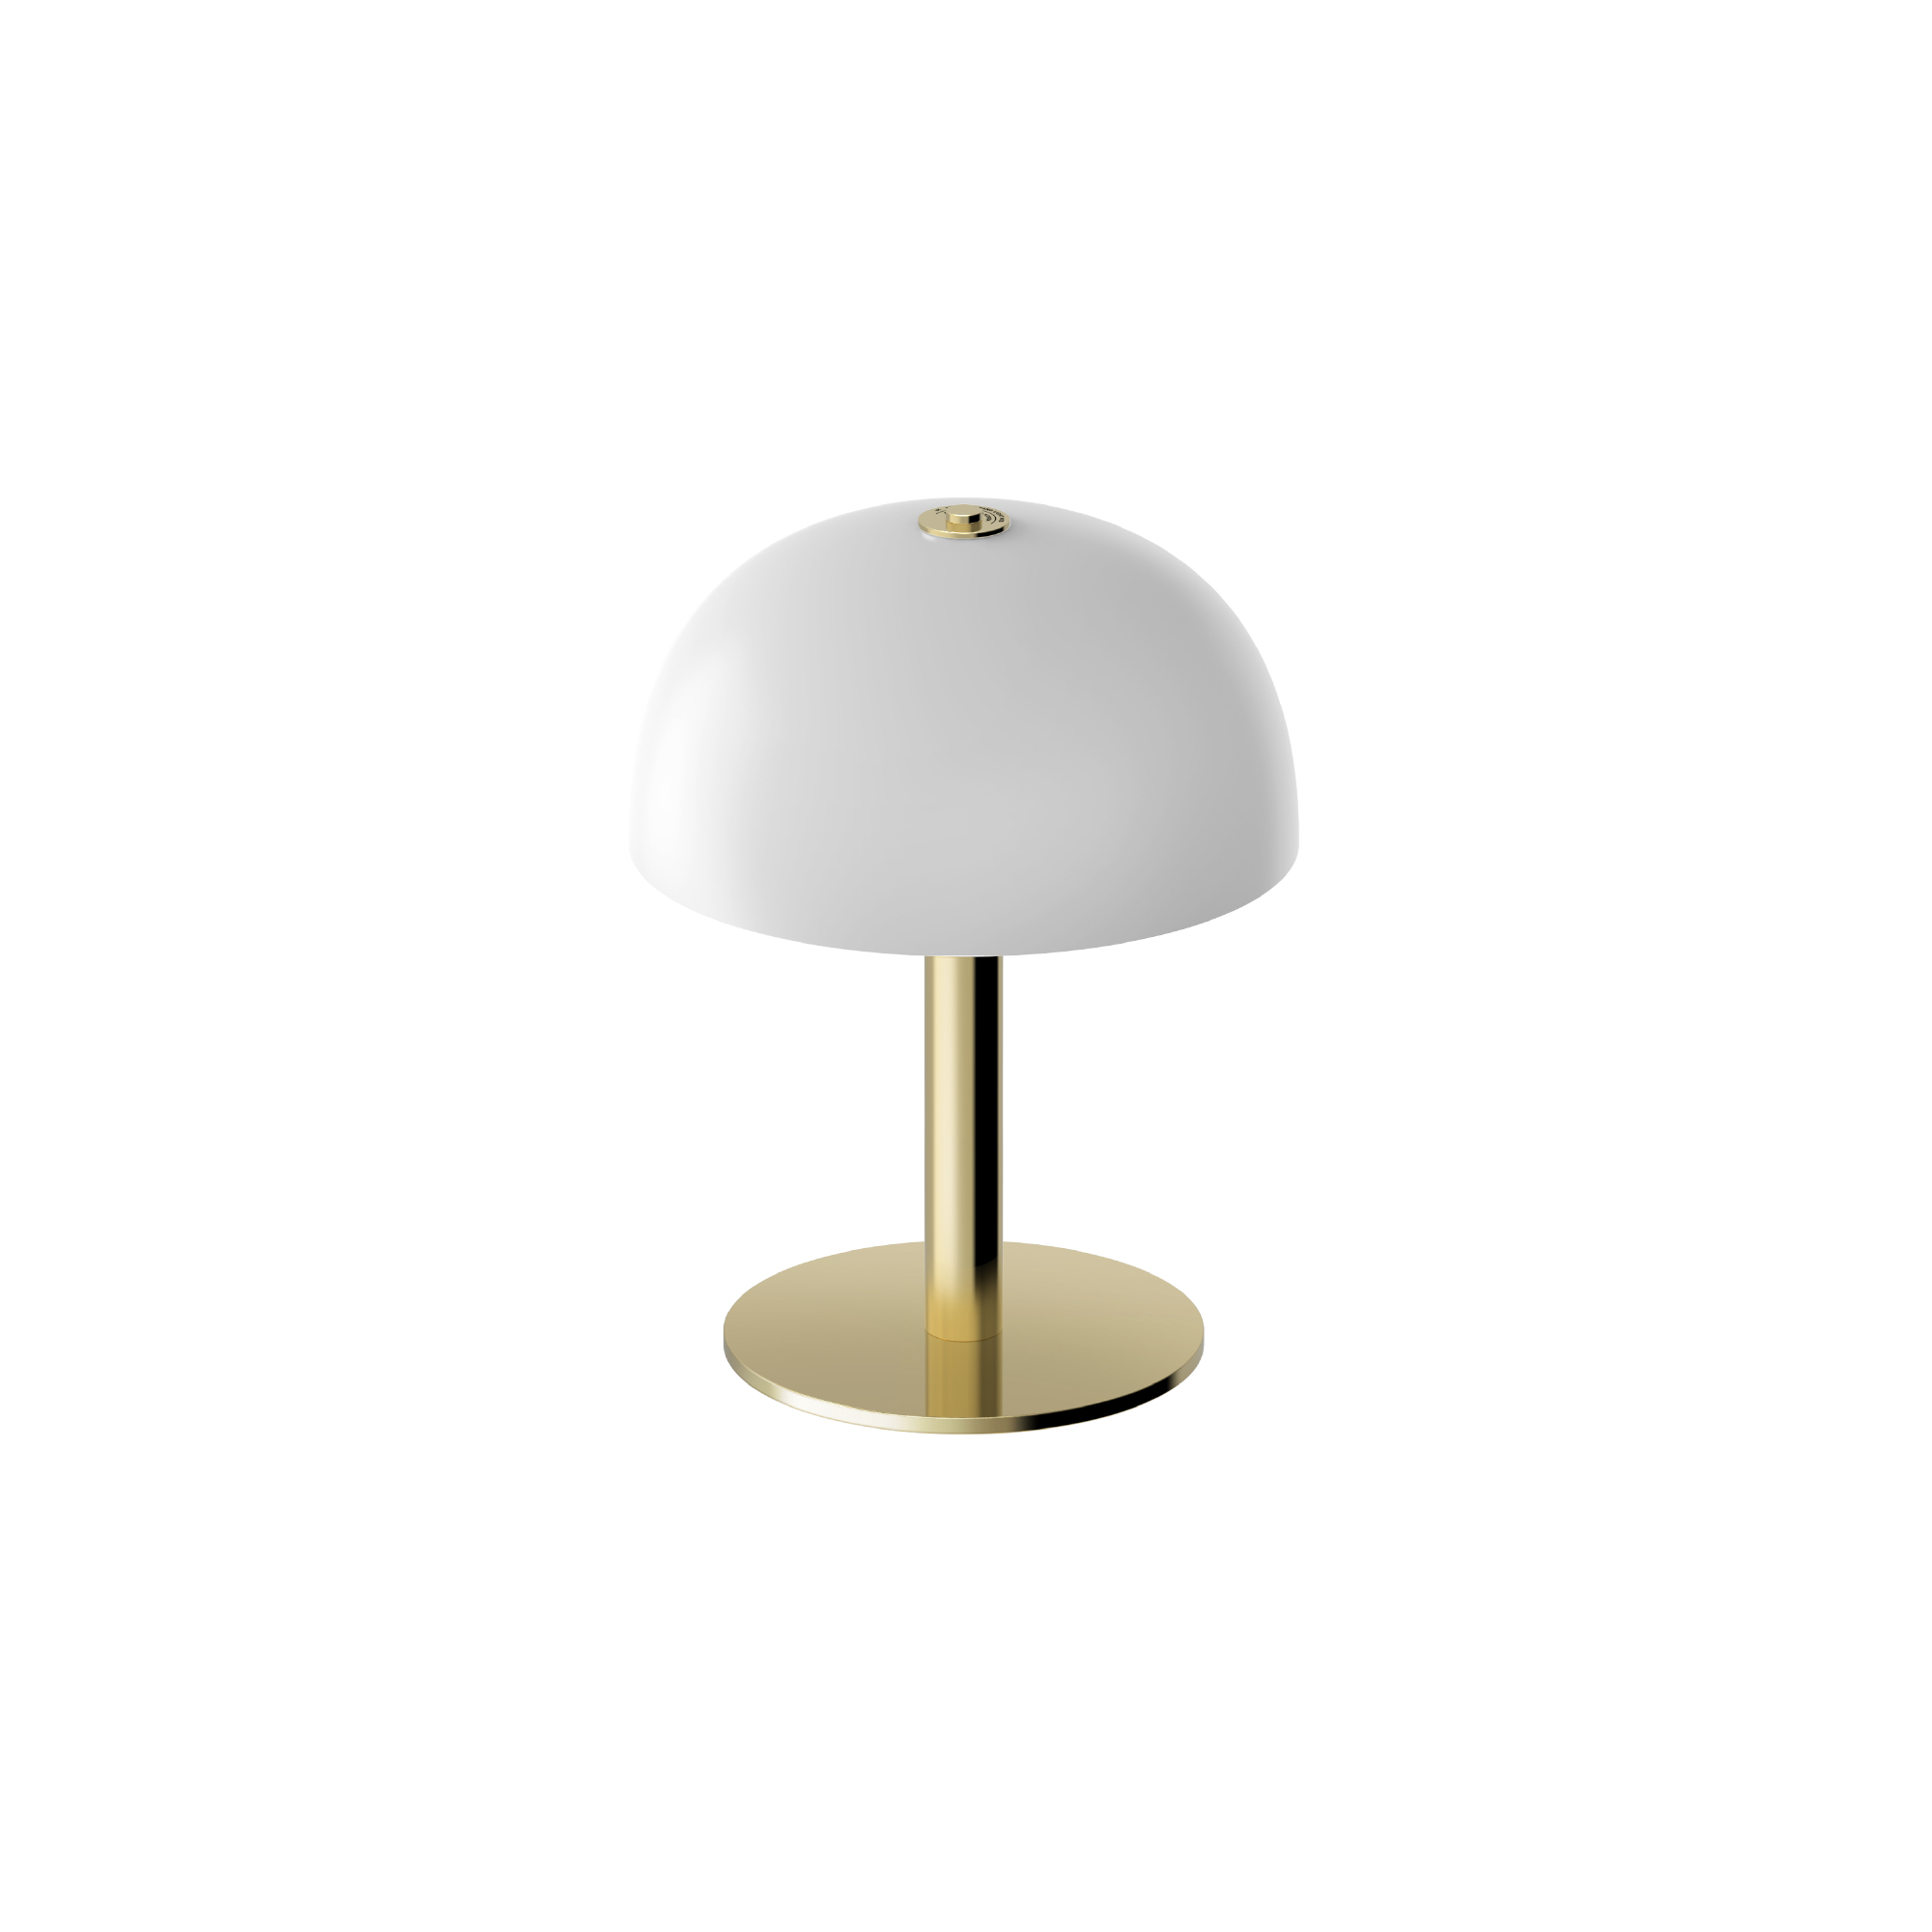 ACORN22 Table Stand White Edition